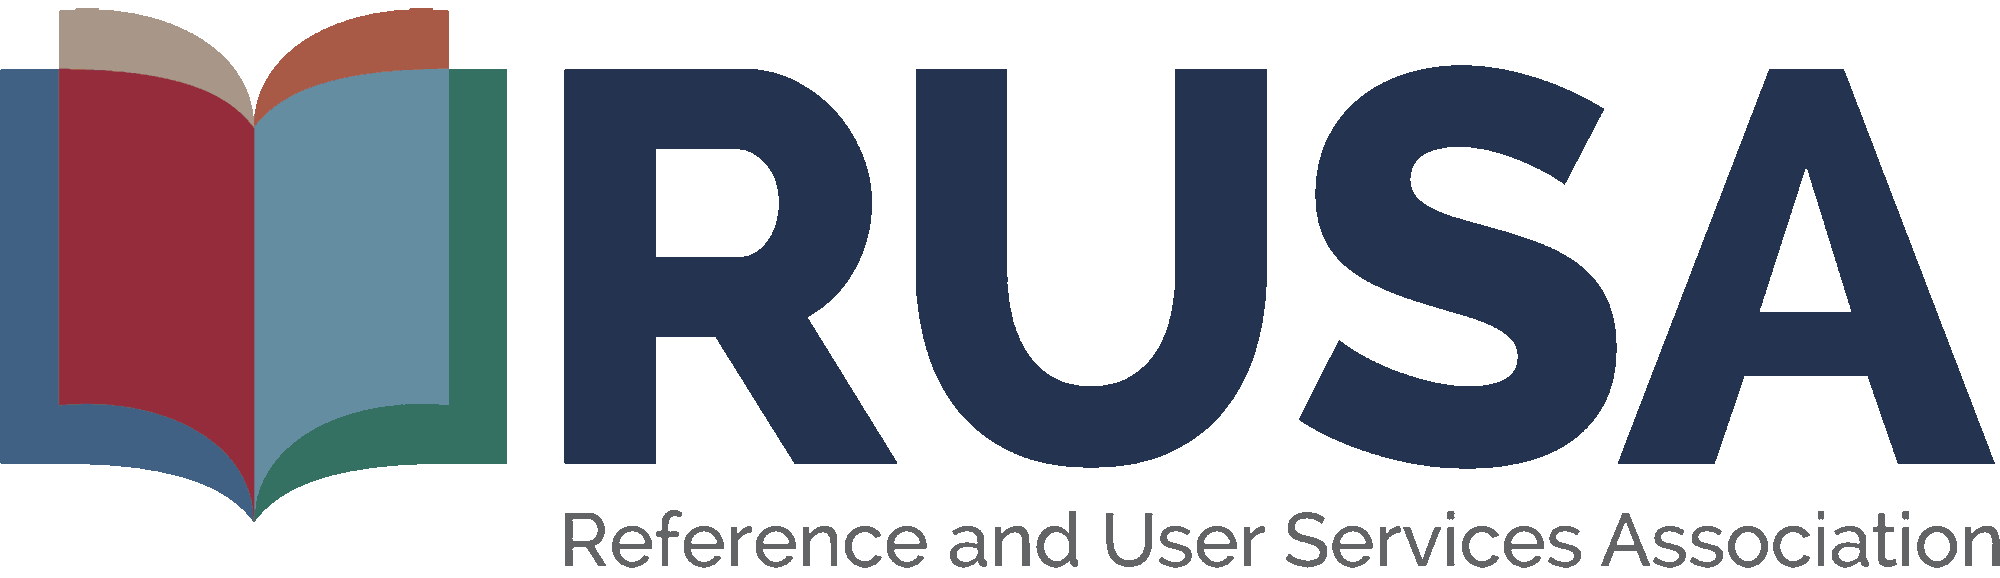 Reference.com Logo - Reference & User Services Association (RUSA)